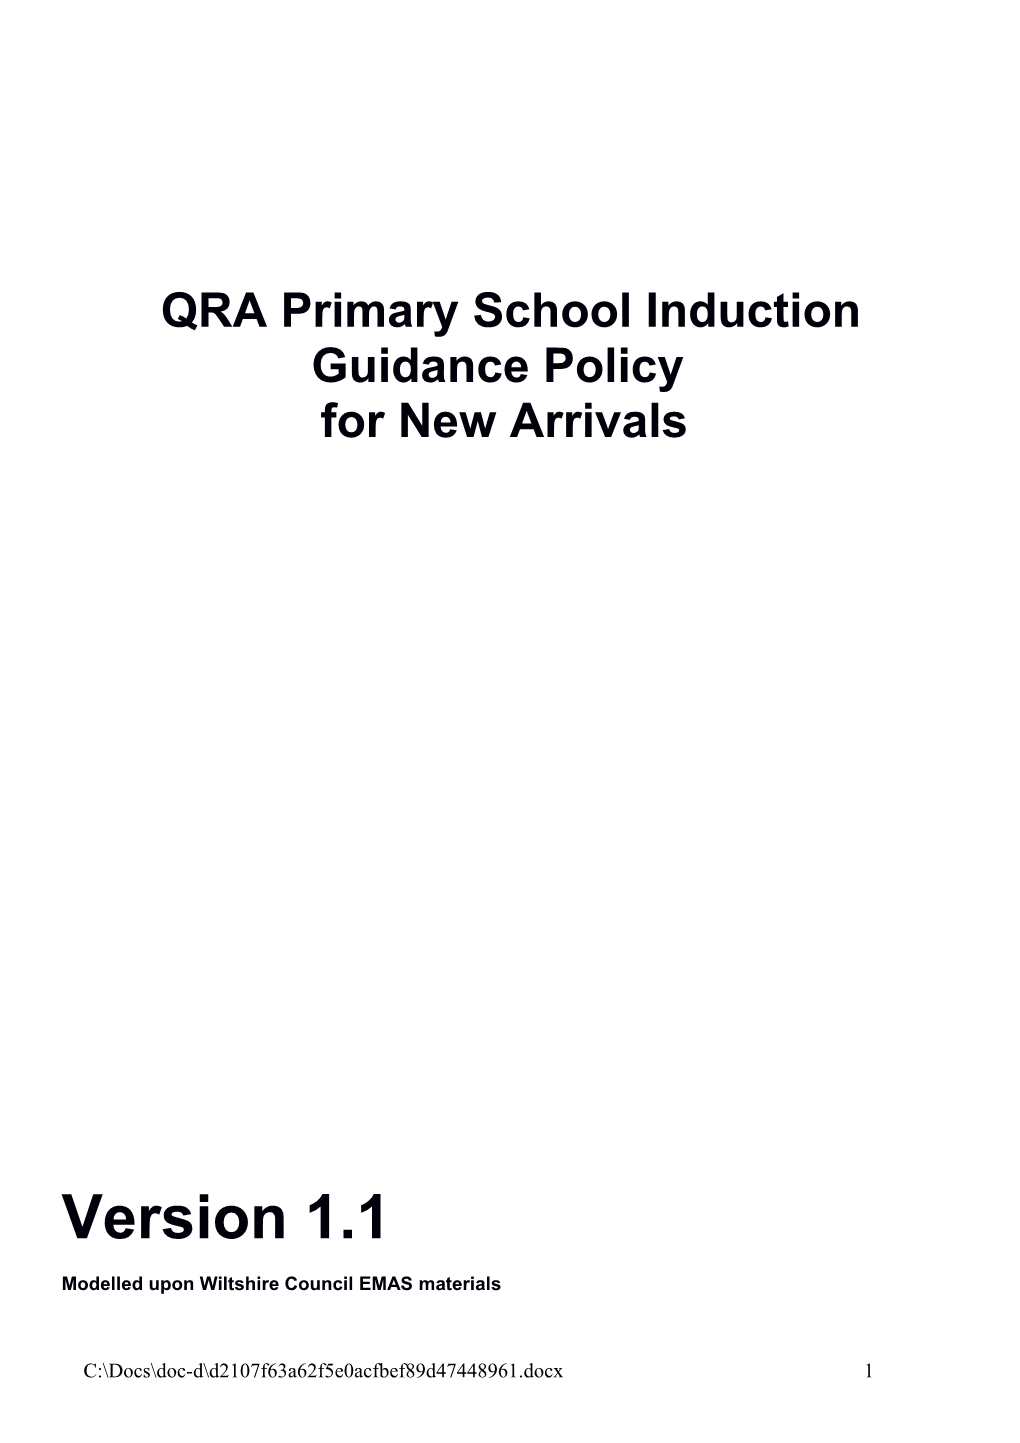 QRA Primary School Induction Guidance Policy